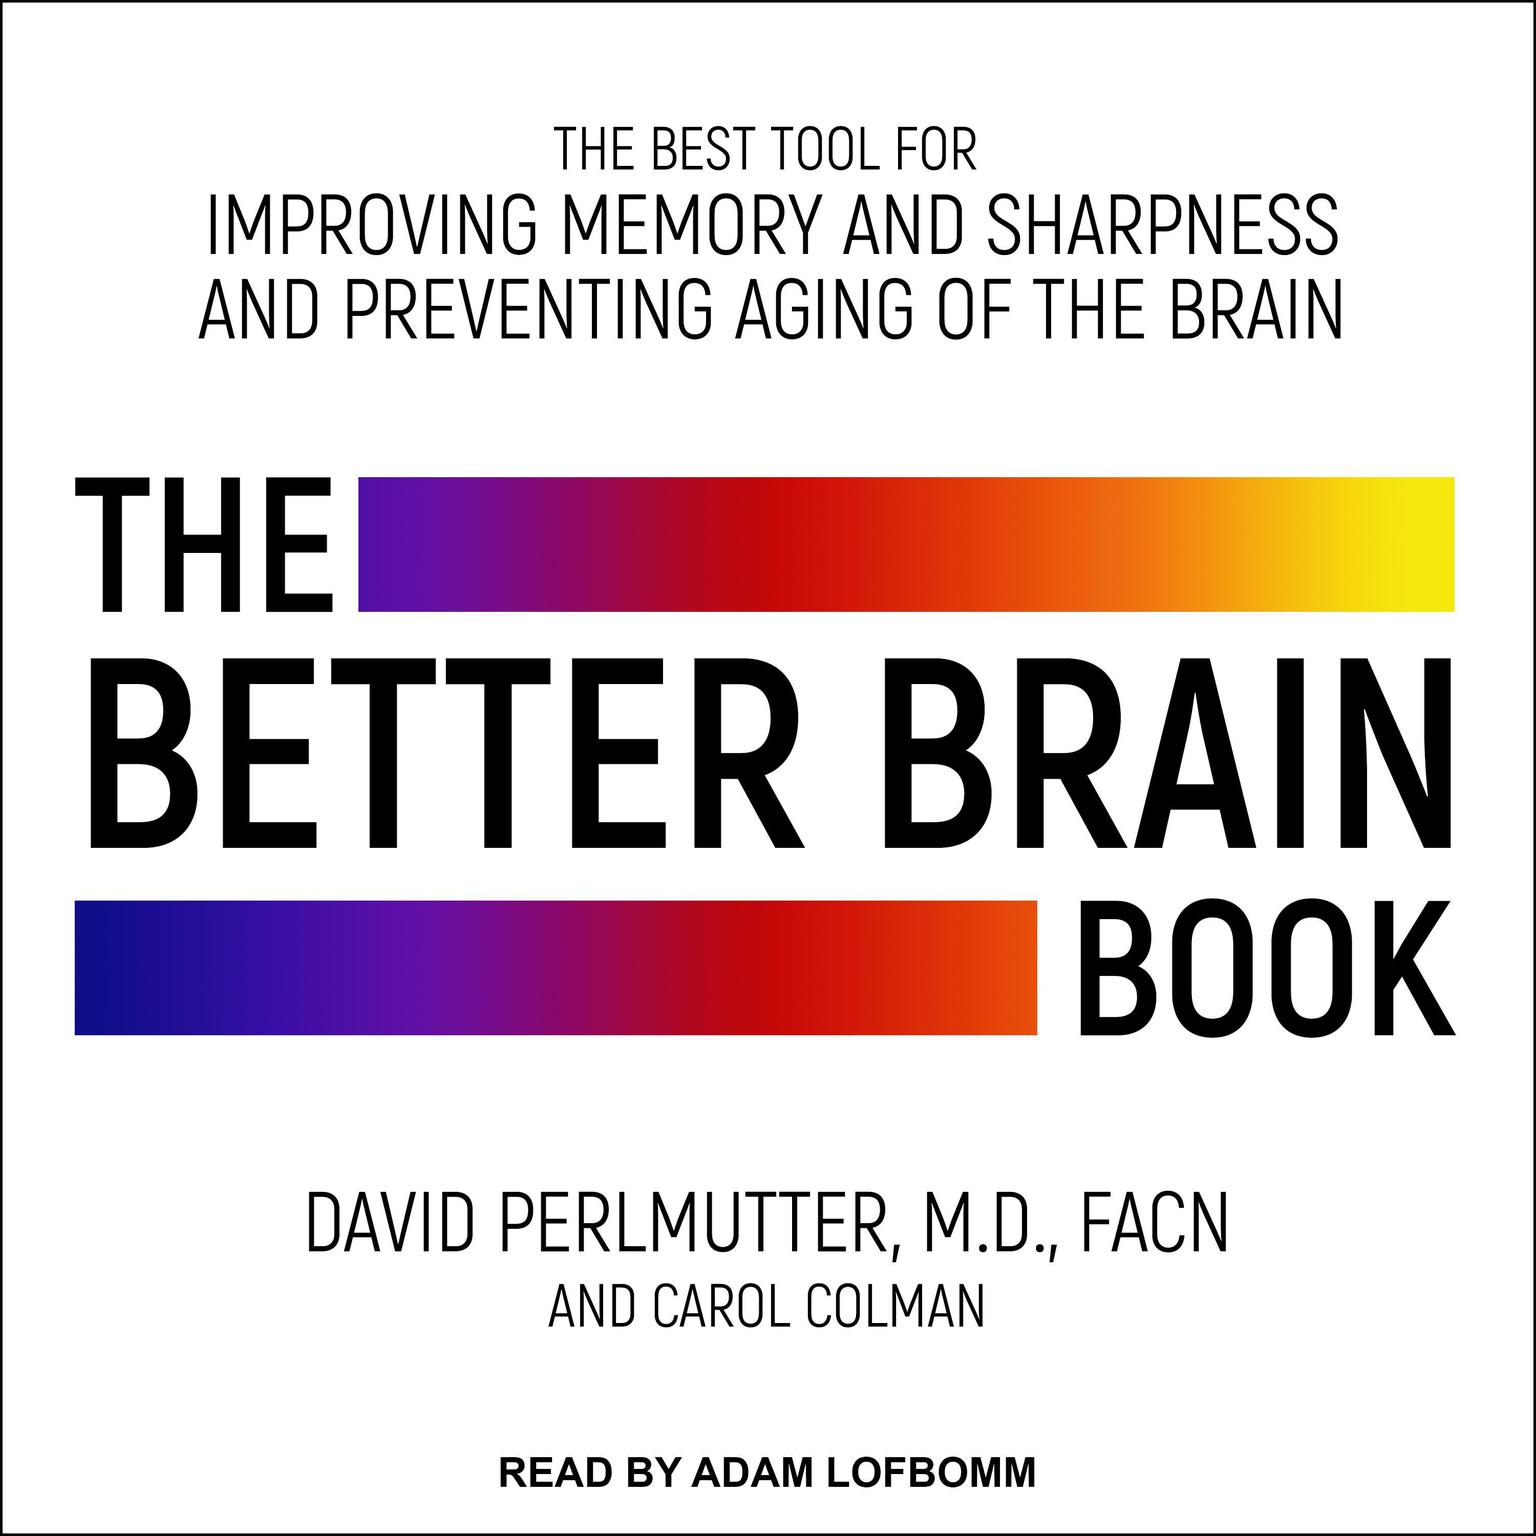 The Better Brain Book: The Best Tools for Improving Memory and Sharpness and Preventing Aging of the Brain Audiobook, by David Perlmutter